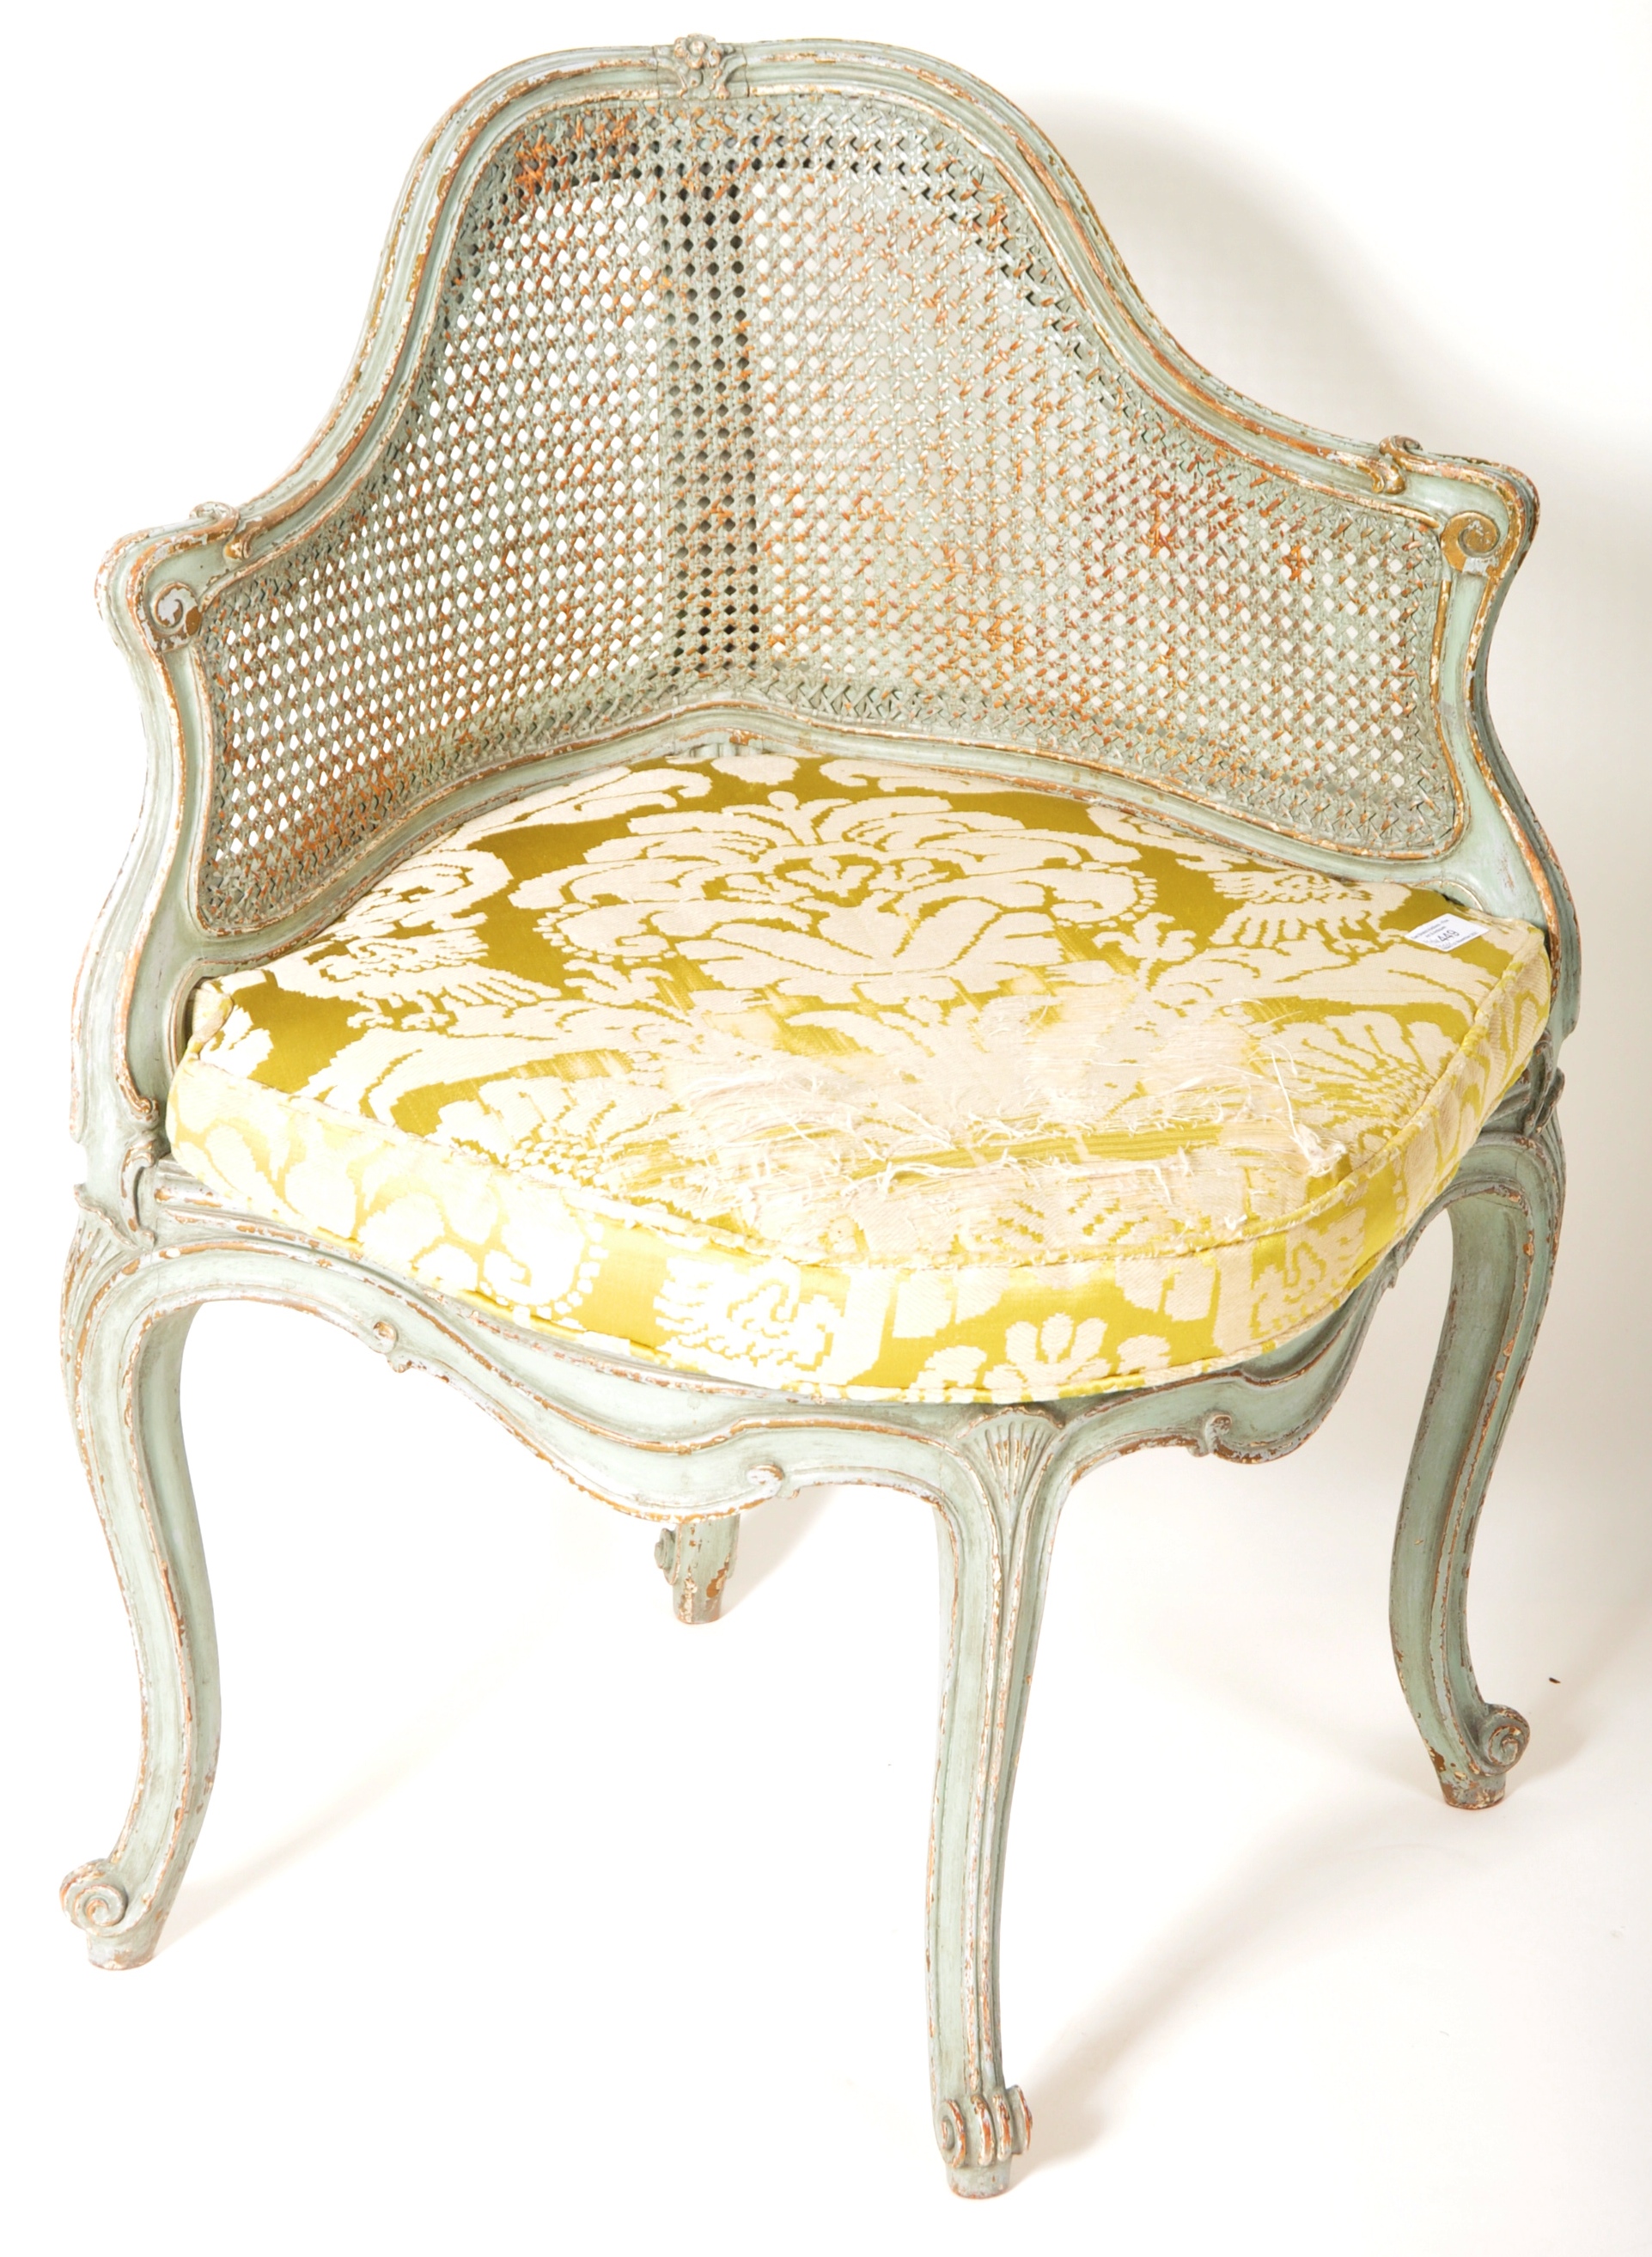 19TH CENTURY FRENCH BERGERE CORNER CHAIR - Image 2 of 13